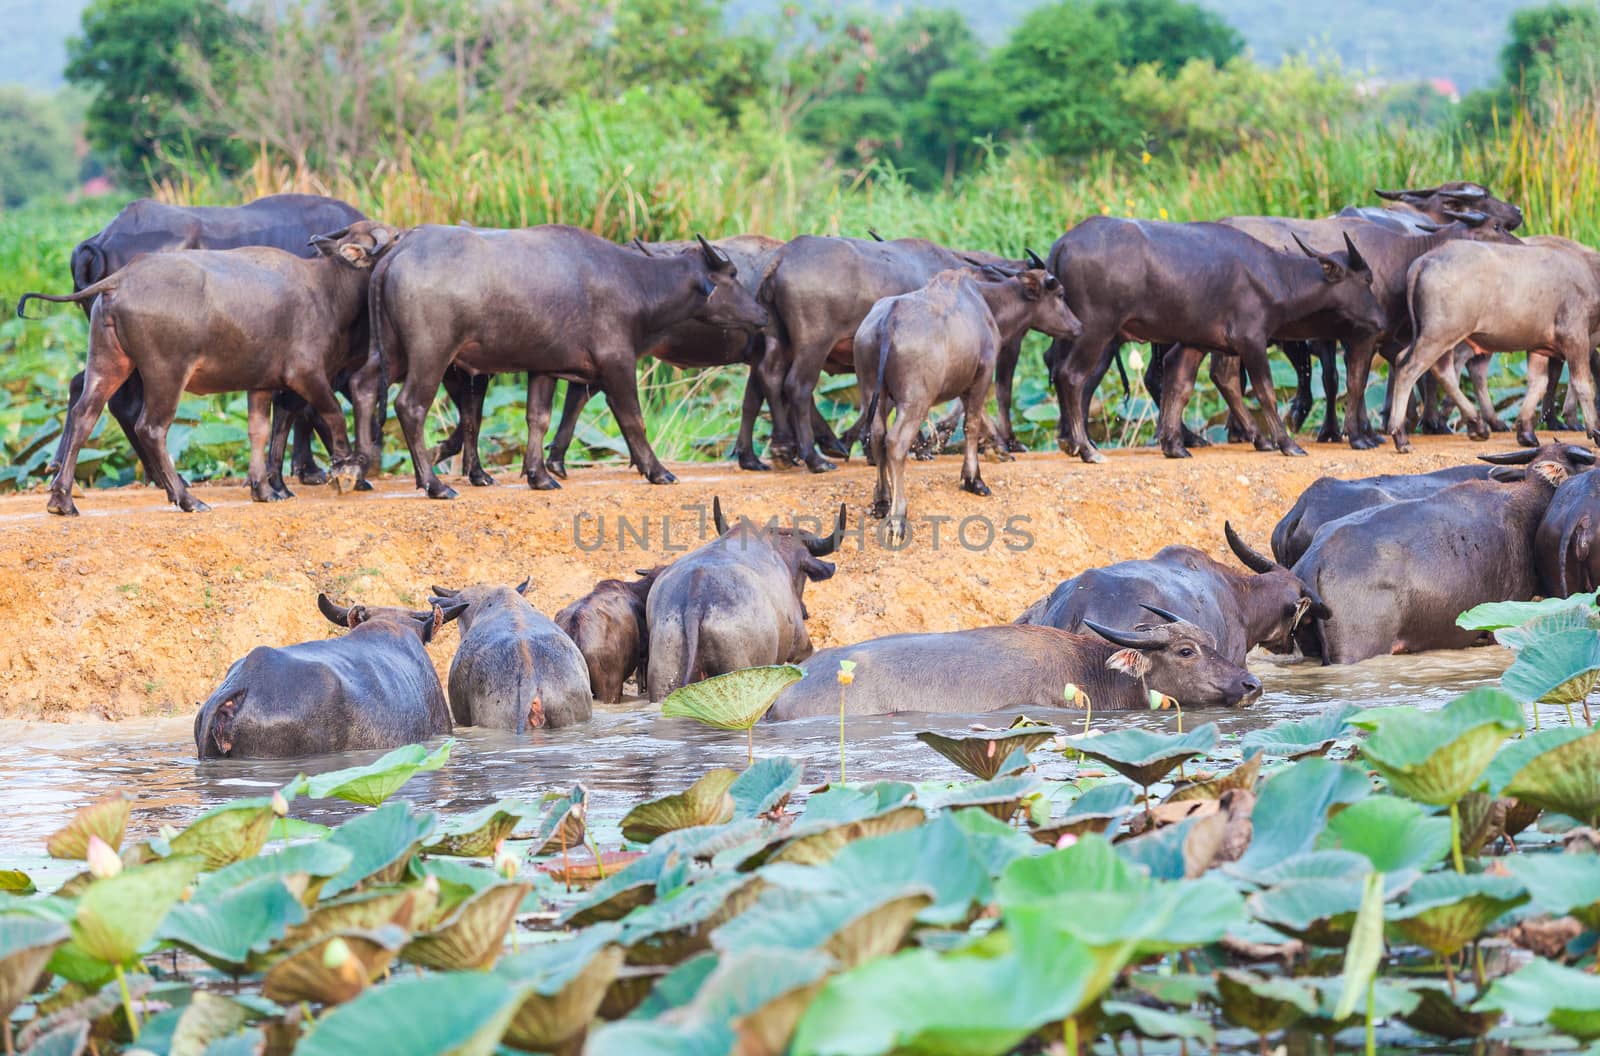 buffalo  in the river by jame_j@homail.com